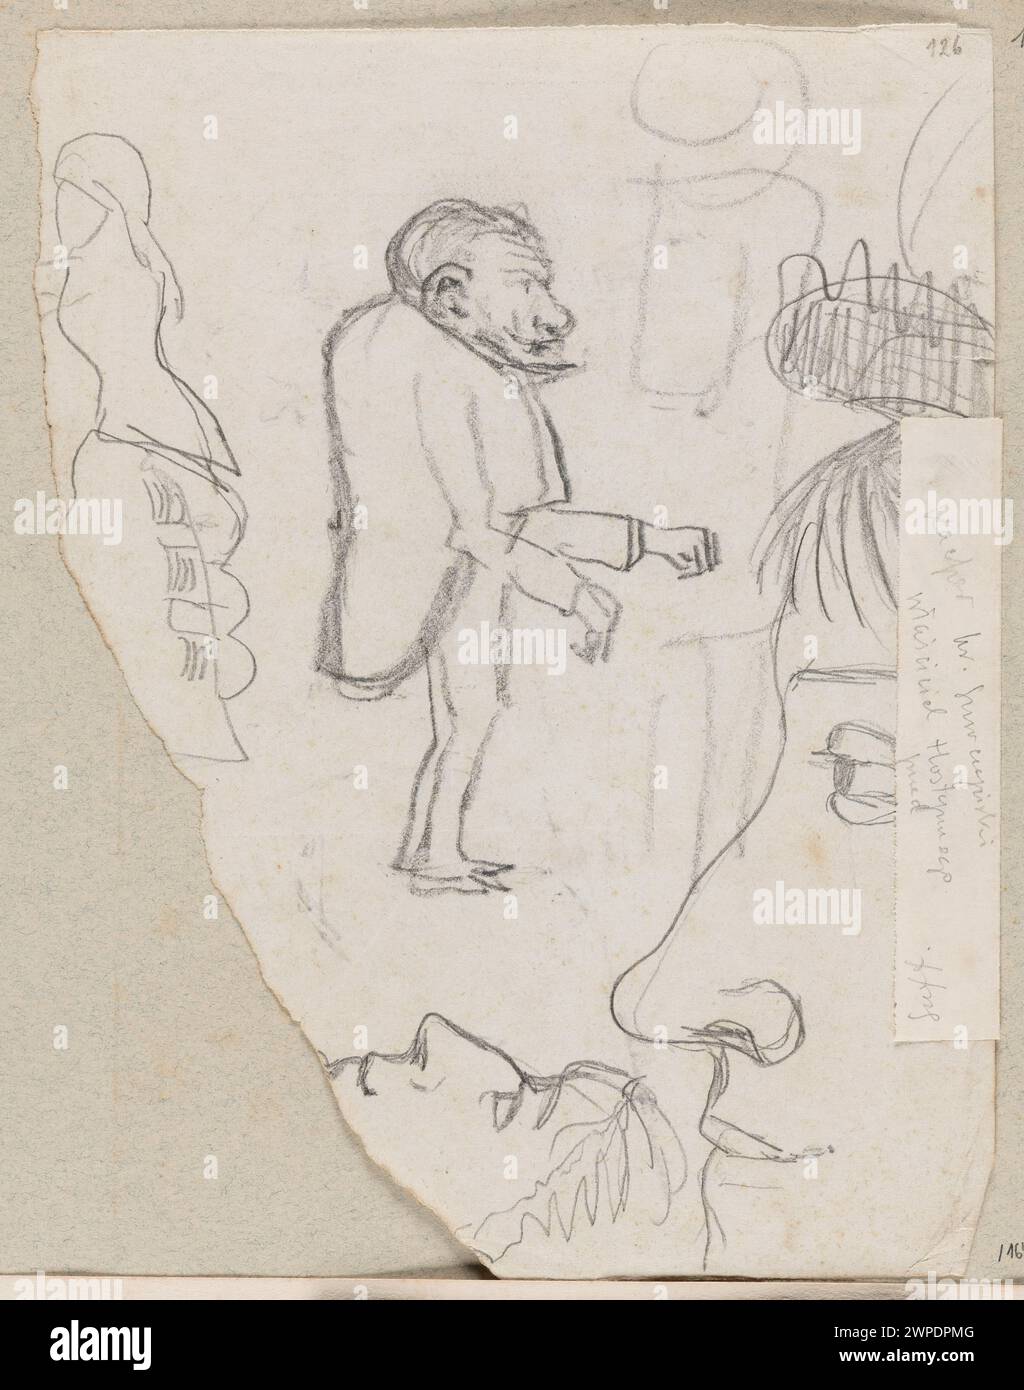 Character sketch, caricature, two head sketches; Verso: Three sketches of men's heads, calculations; Czachórski, Stanisław (1853-1904); before 1904 (1873-00-00-1904-00-00);Brody (beard), heads, caricatures, moral caricatures, portraits, men's portraits, character studies, sketches, faces, purchase (provenance) Stock Photo